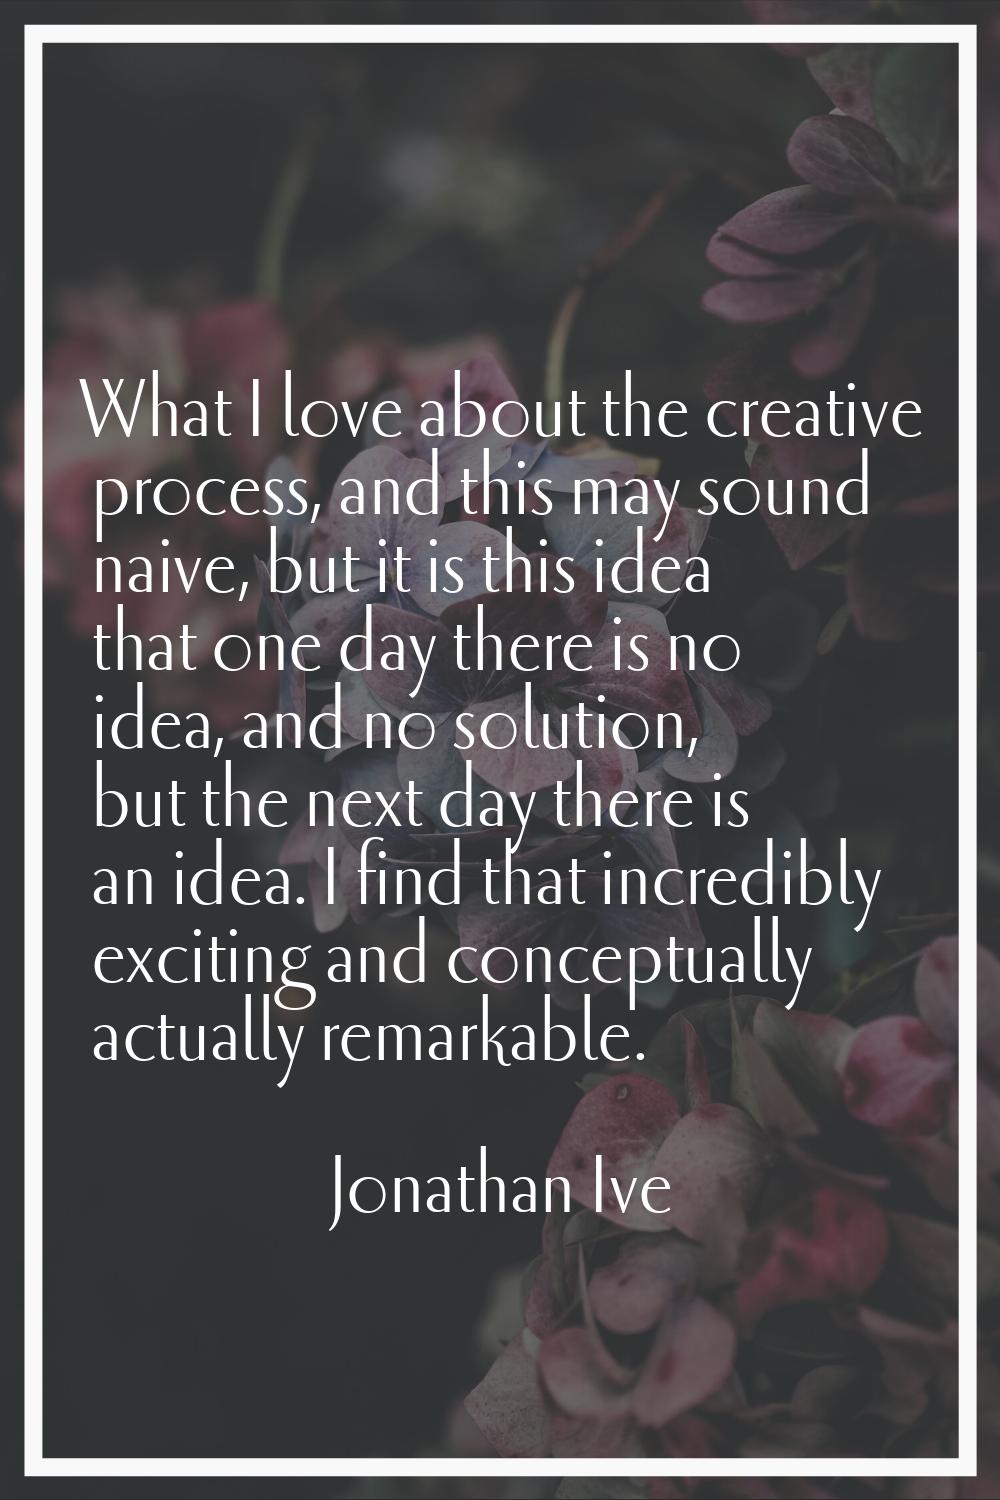 What I love about the creative process, and this may sound naive, but it is this idea that one day 